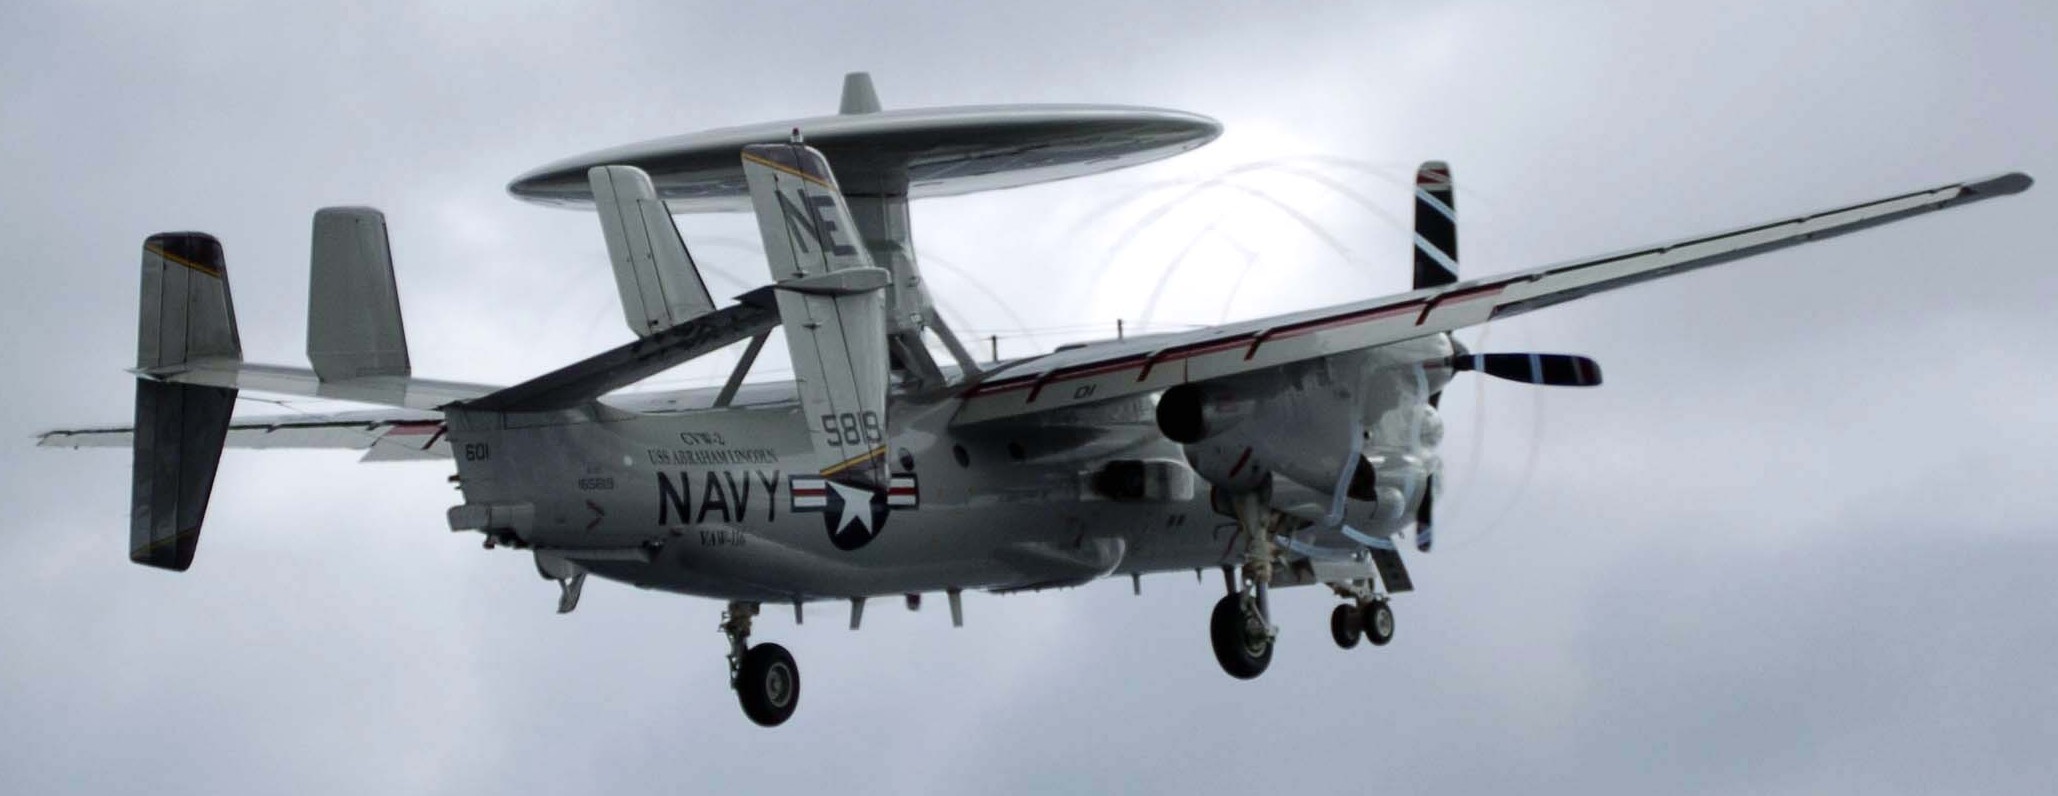 vaw-116 sun kings airborne command control squadron carrier early warning cvw-2 uss abraham lincoln cvn-72 10